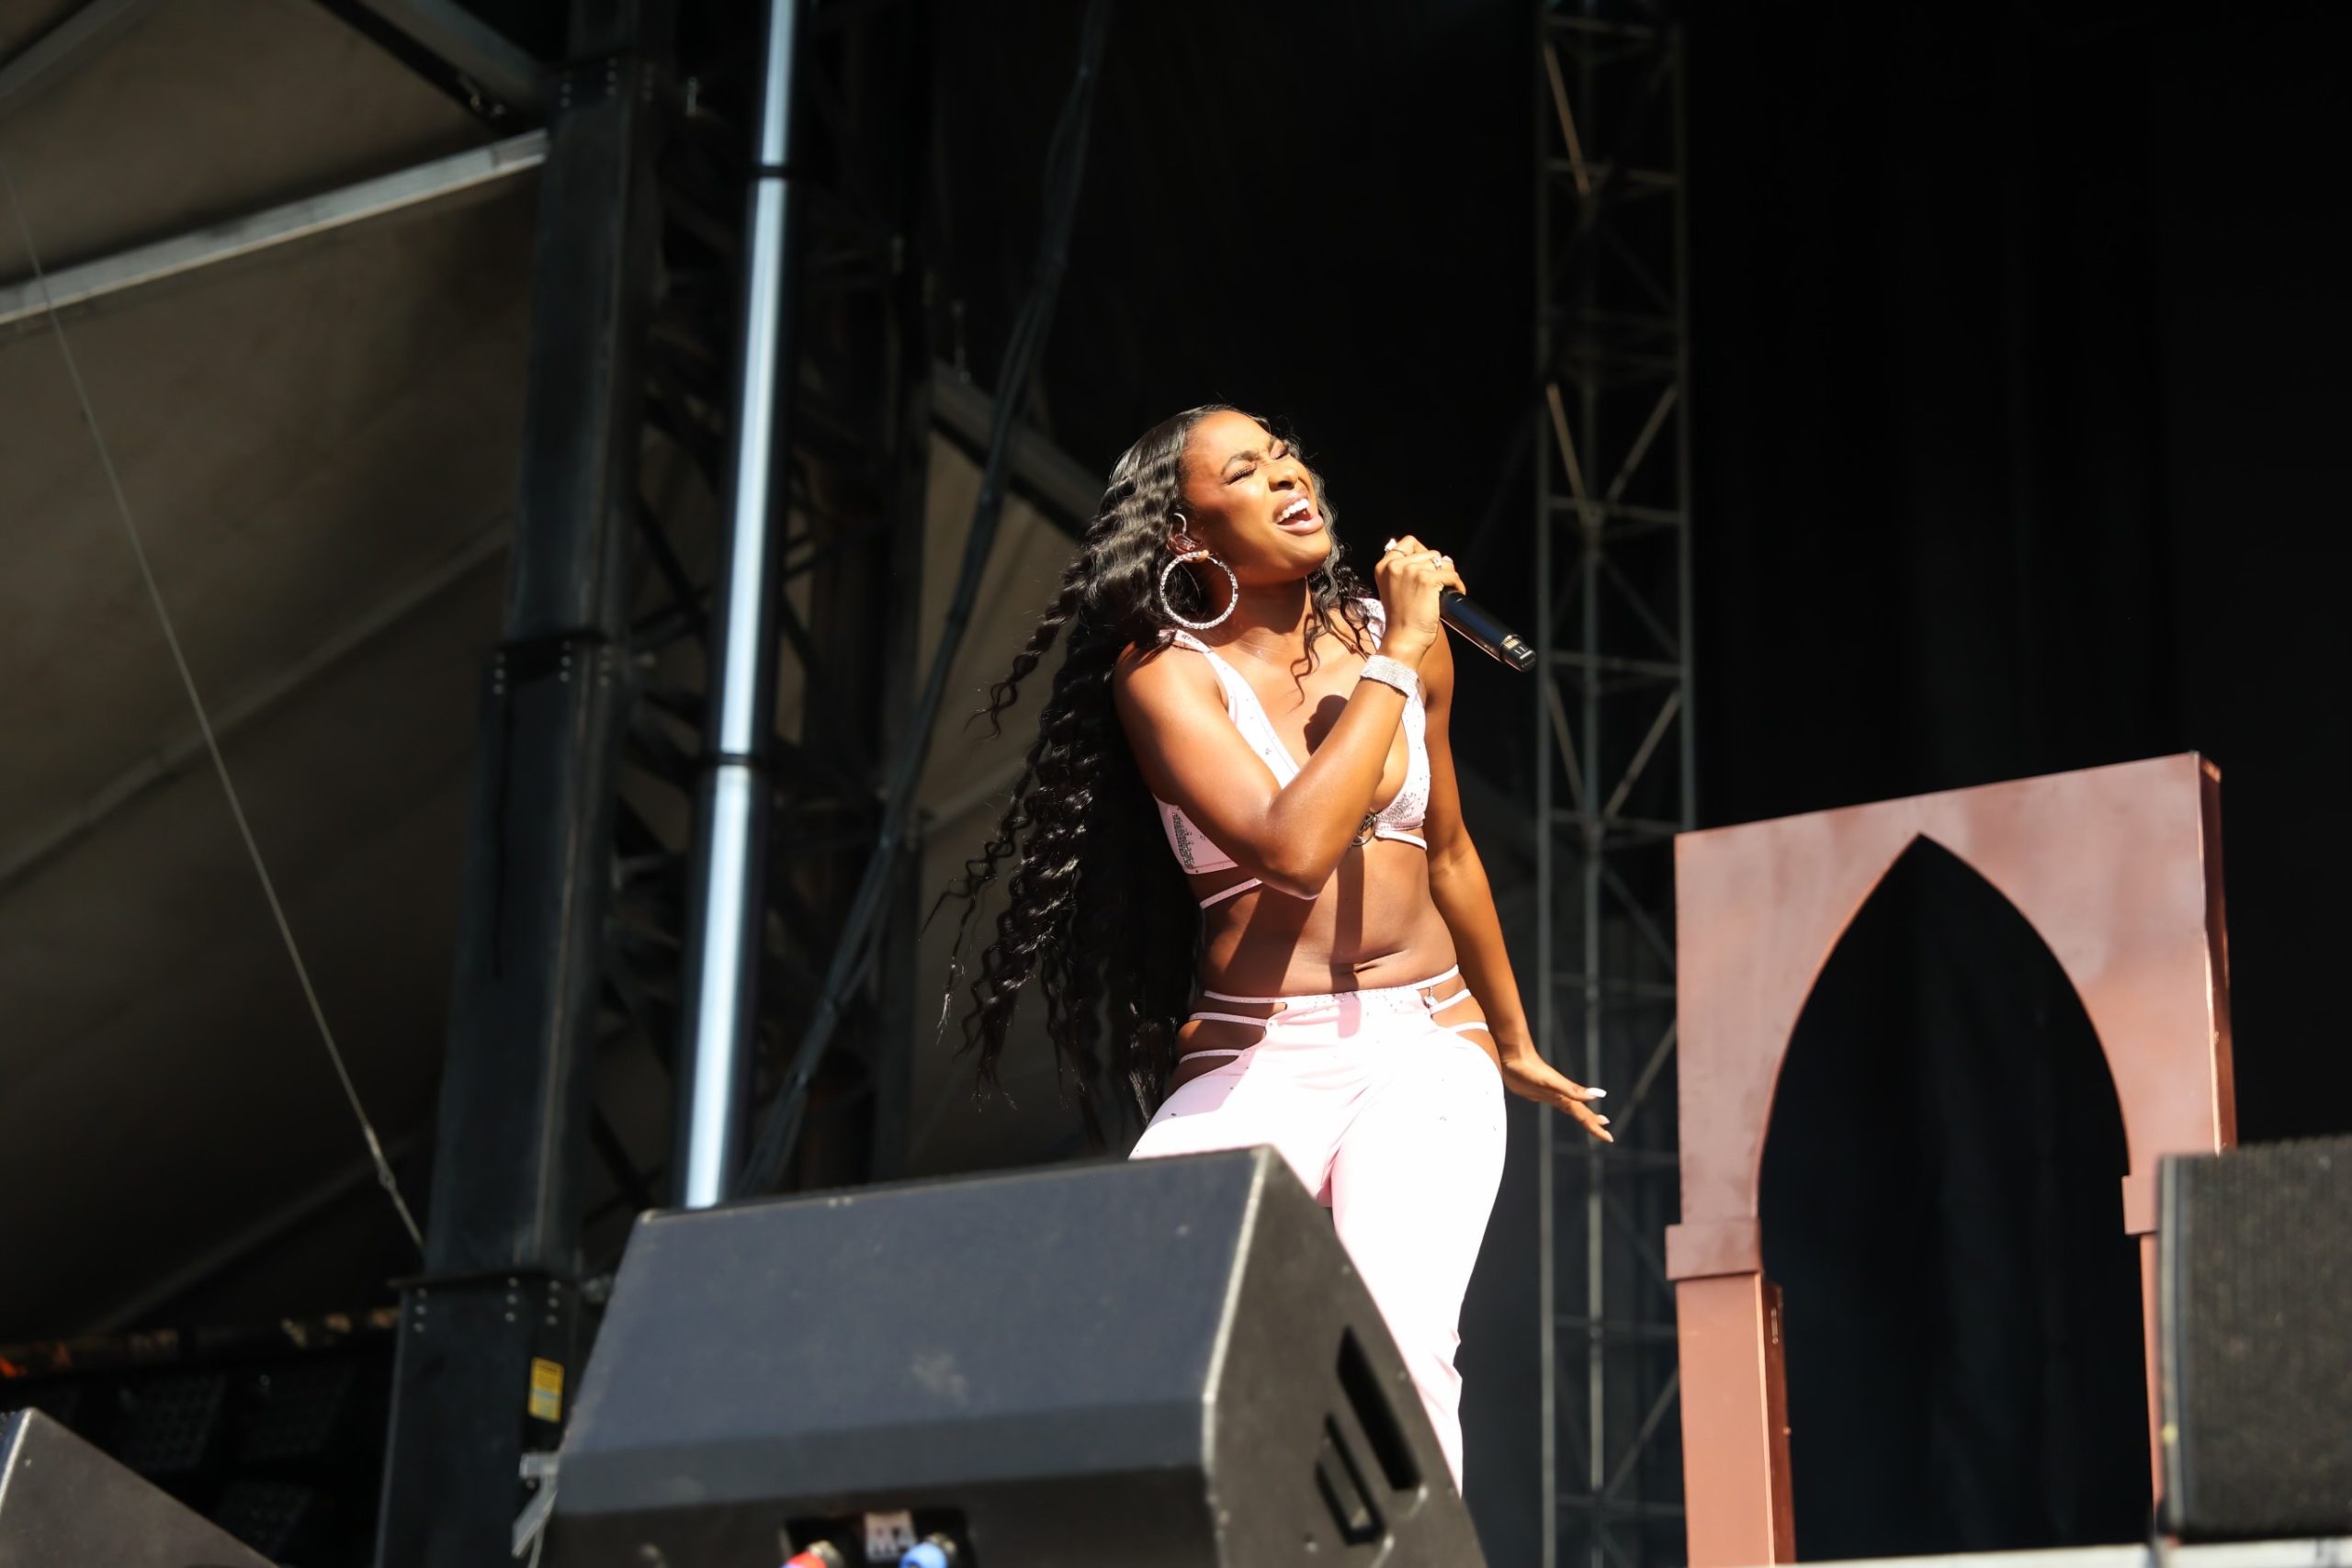 Coco Jones performs at One Music Fest 2023 (Photo Credit) Abbie Knights/The Hype Magazine